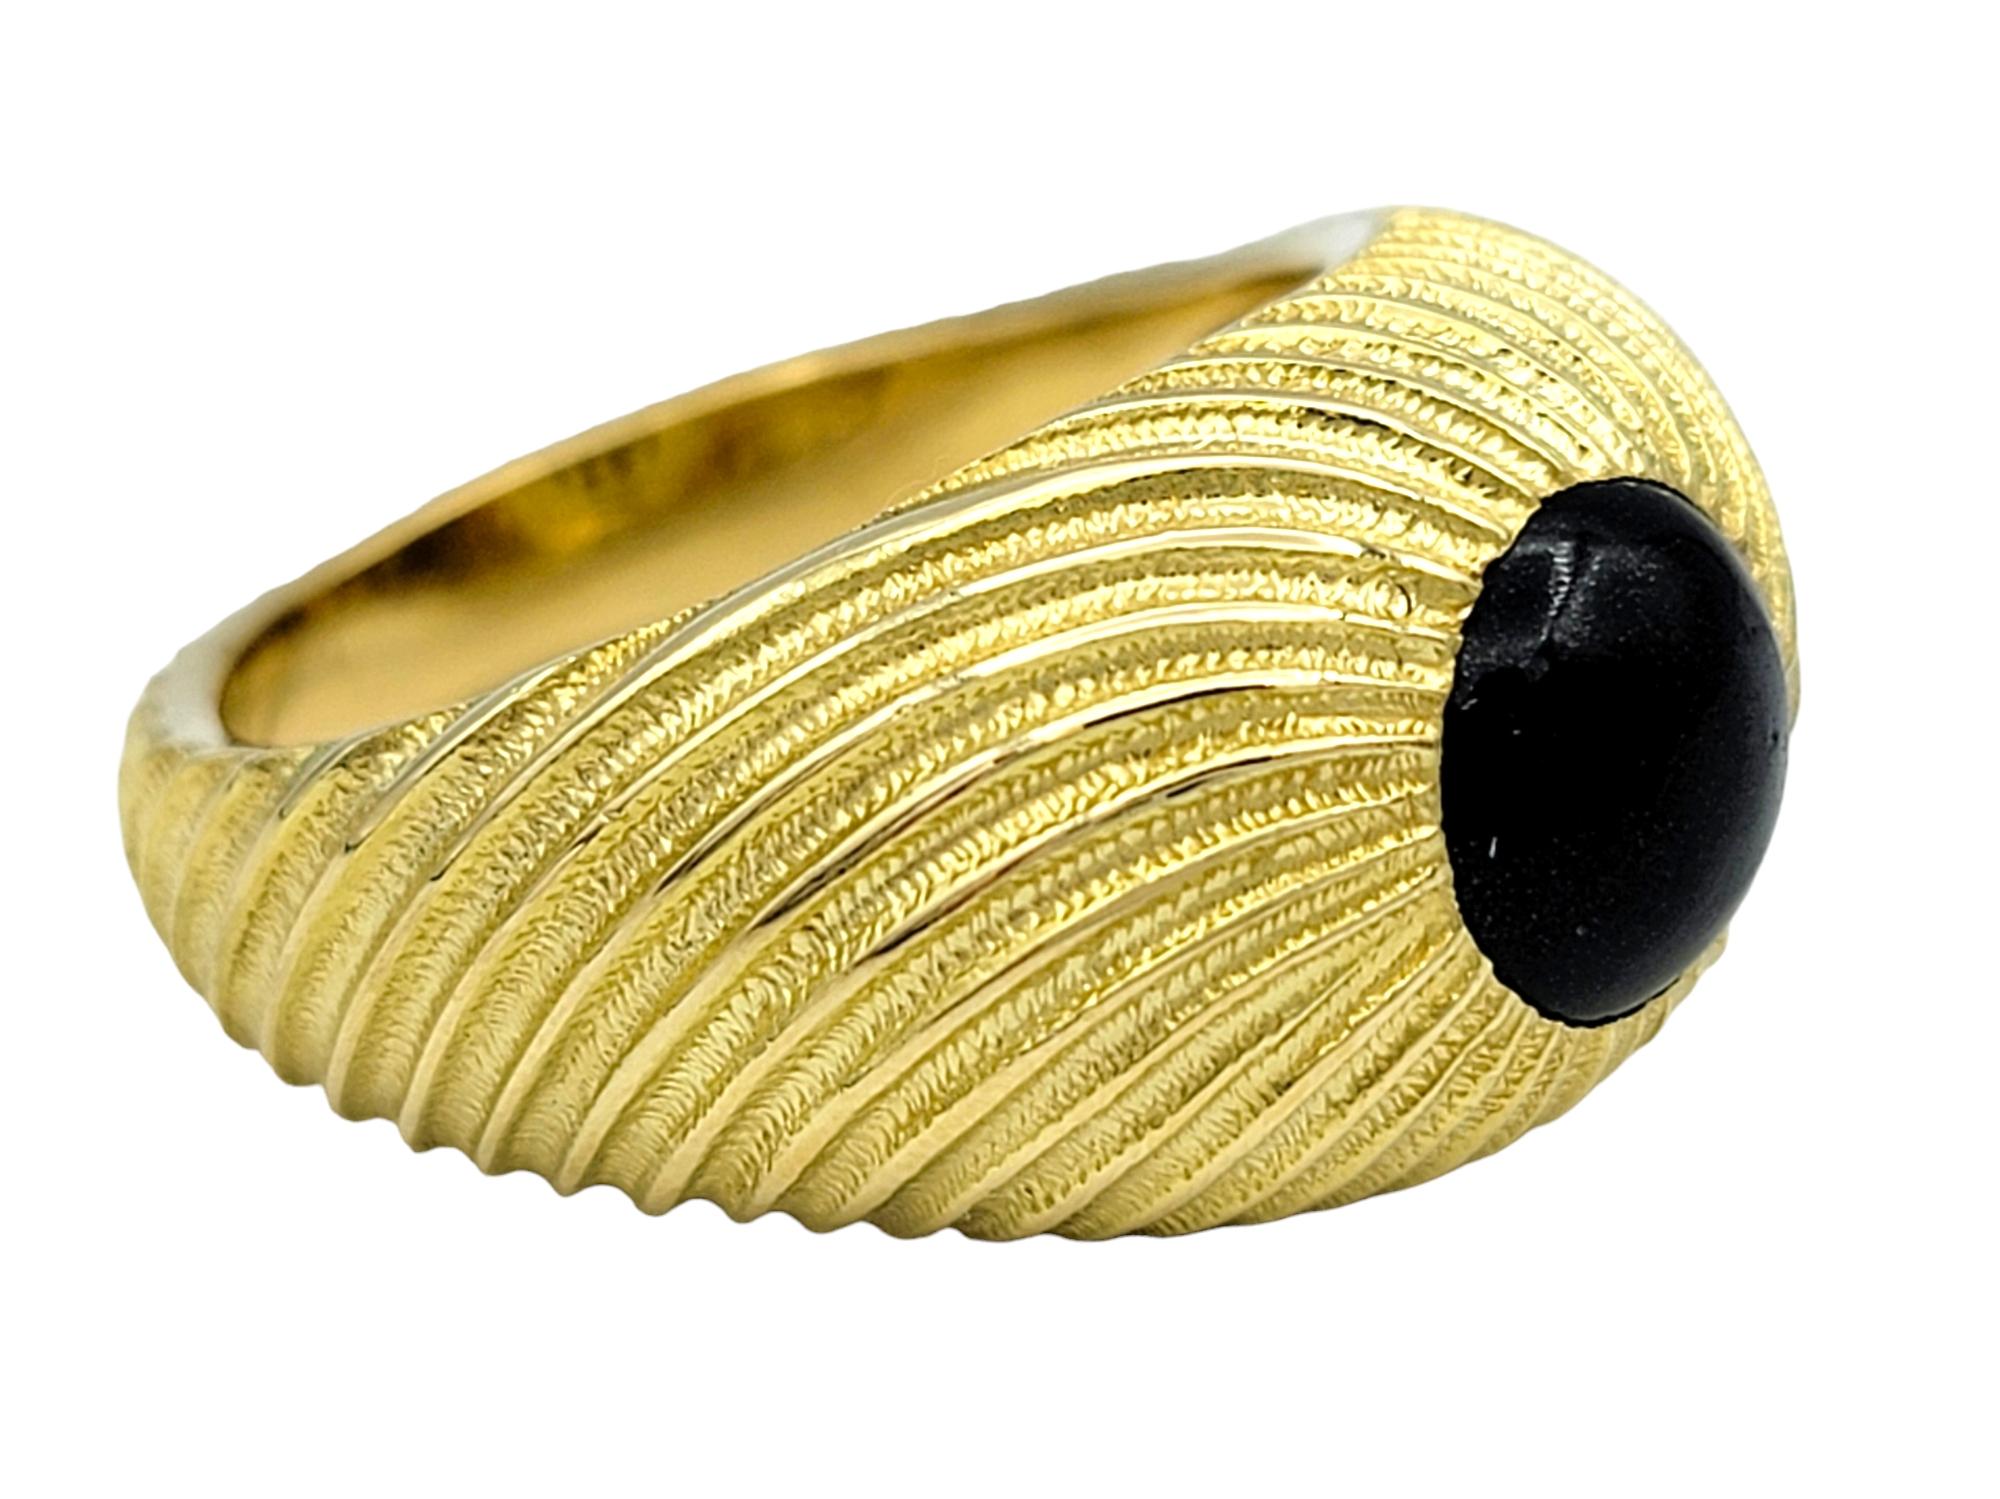 Contemporary Tiffany & Co. Schlumberger Shrimp Style Black Onyx Ring in 18 Karat Yellow Gold For Sale